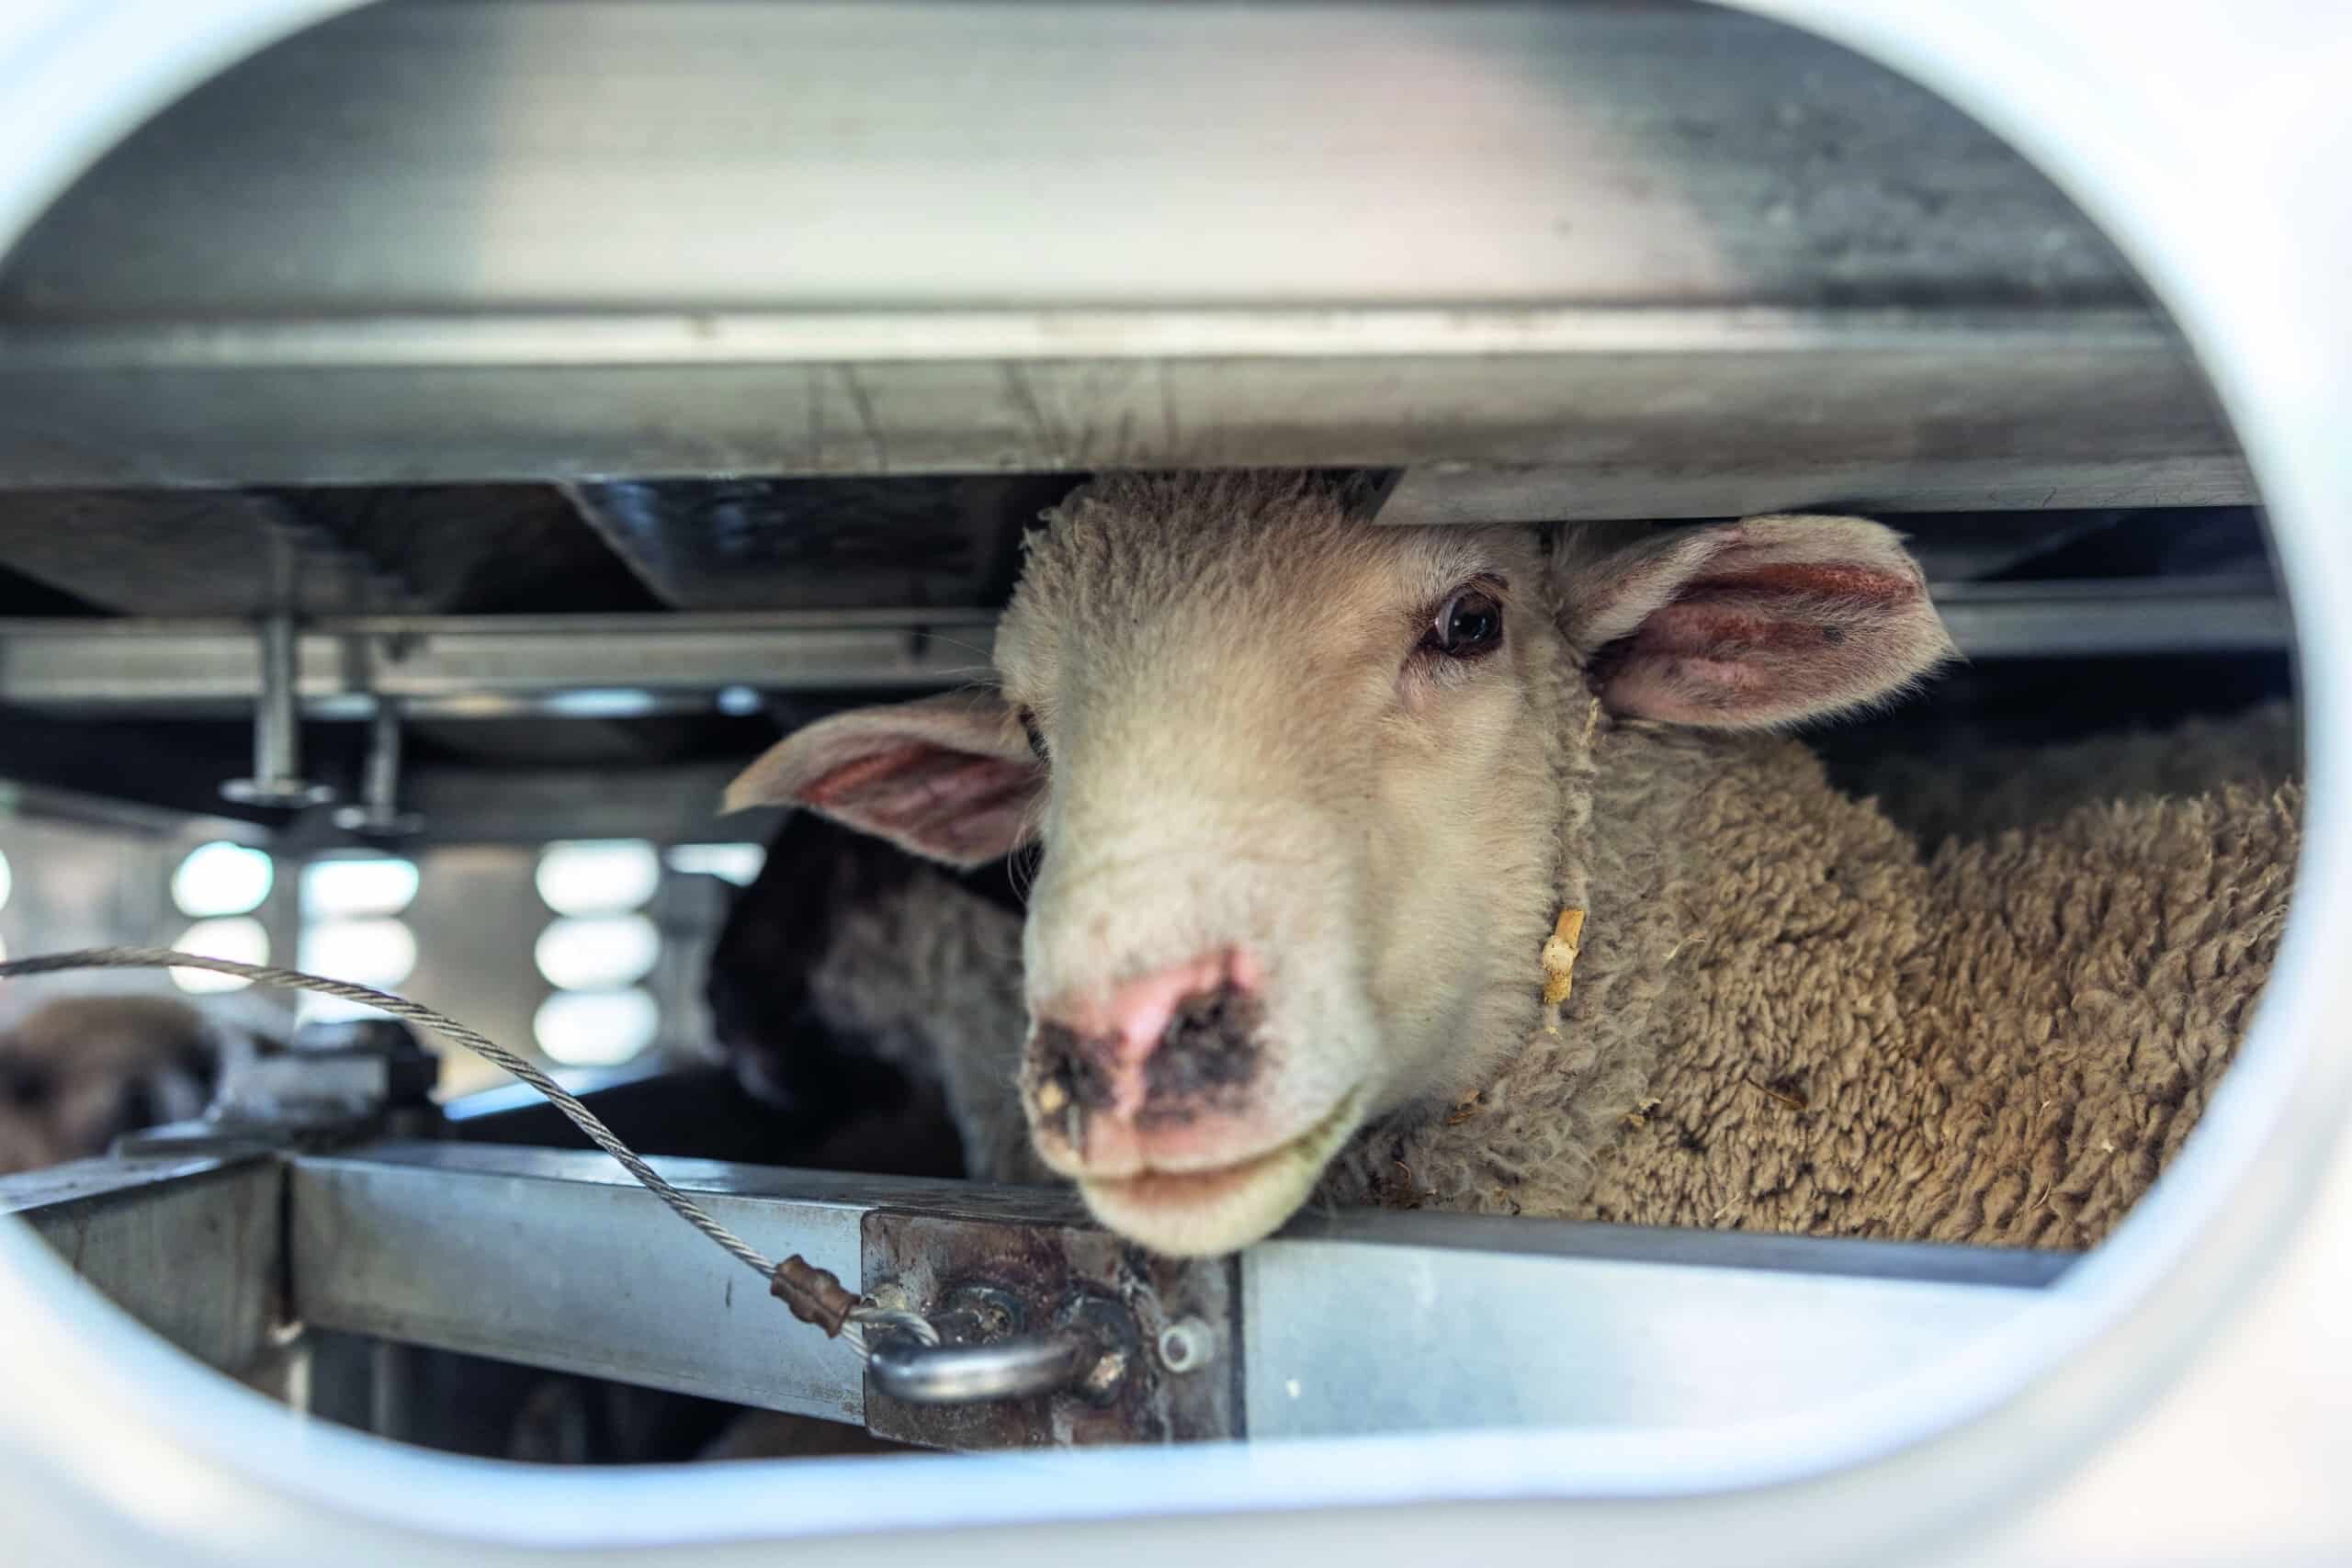 The final voyage is in sight – Live export of sheep by sea will end by 2028.